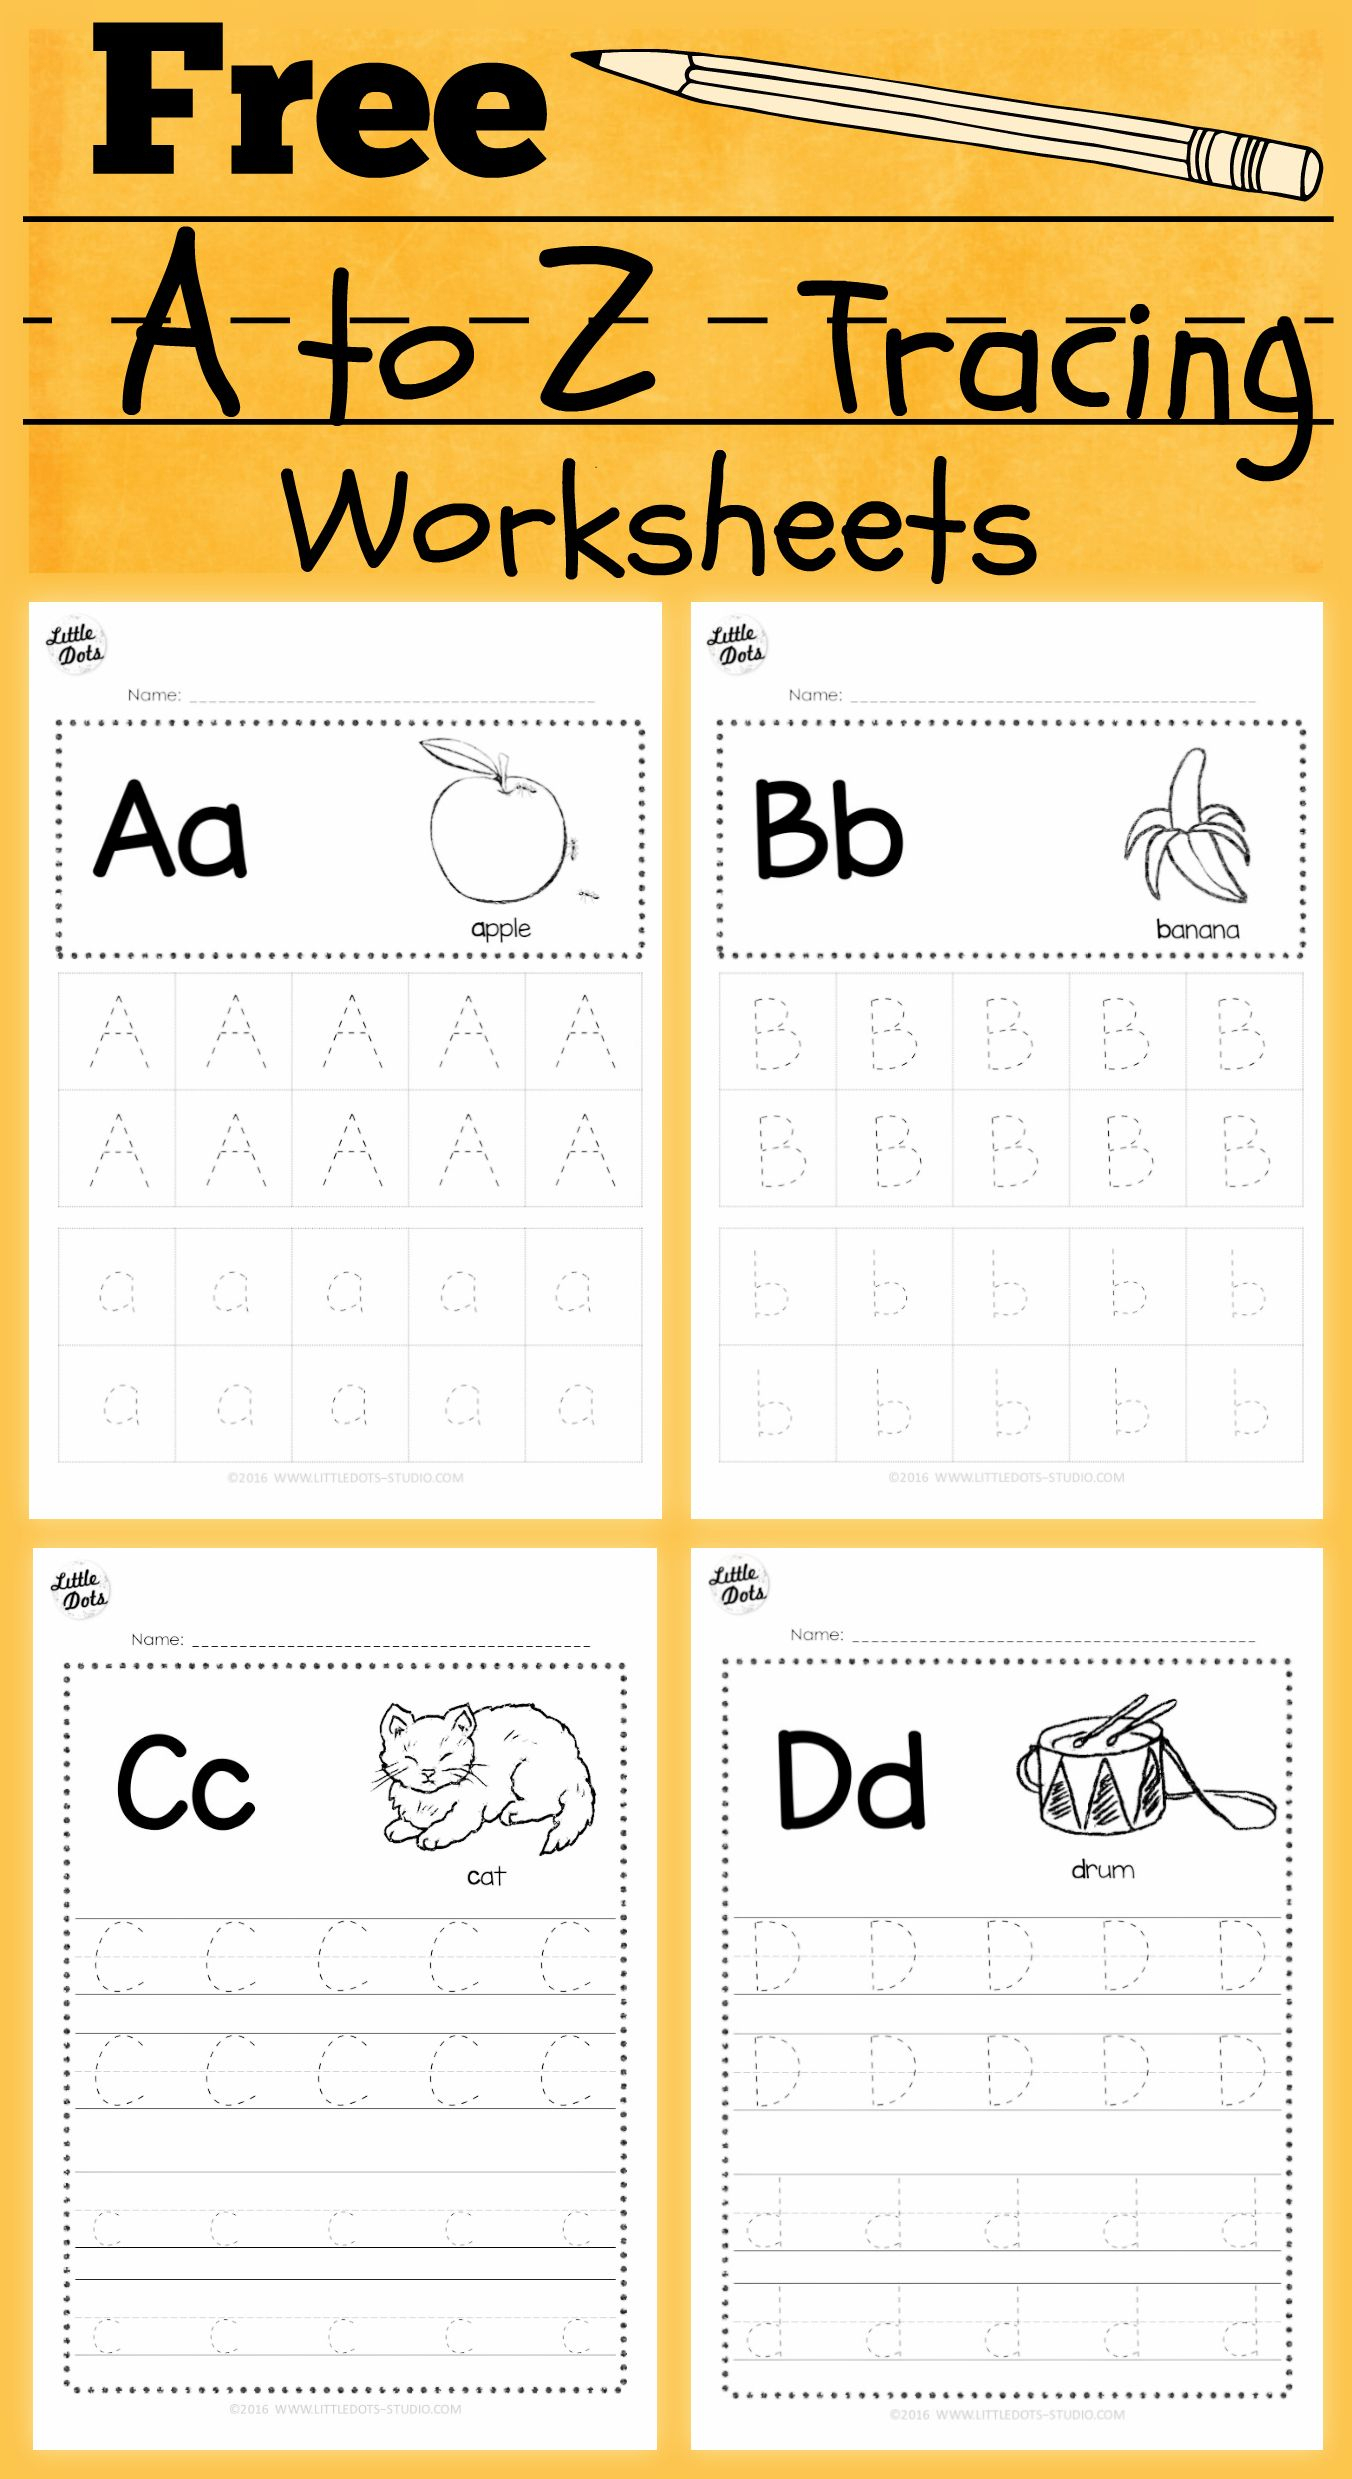 Download Free Alphabet Tracing Worksheets For Letter A To Z throughout A To Z Name Tracing Worksheets